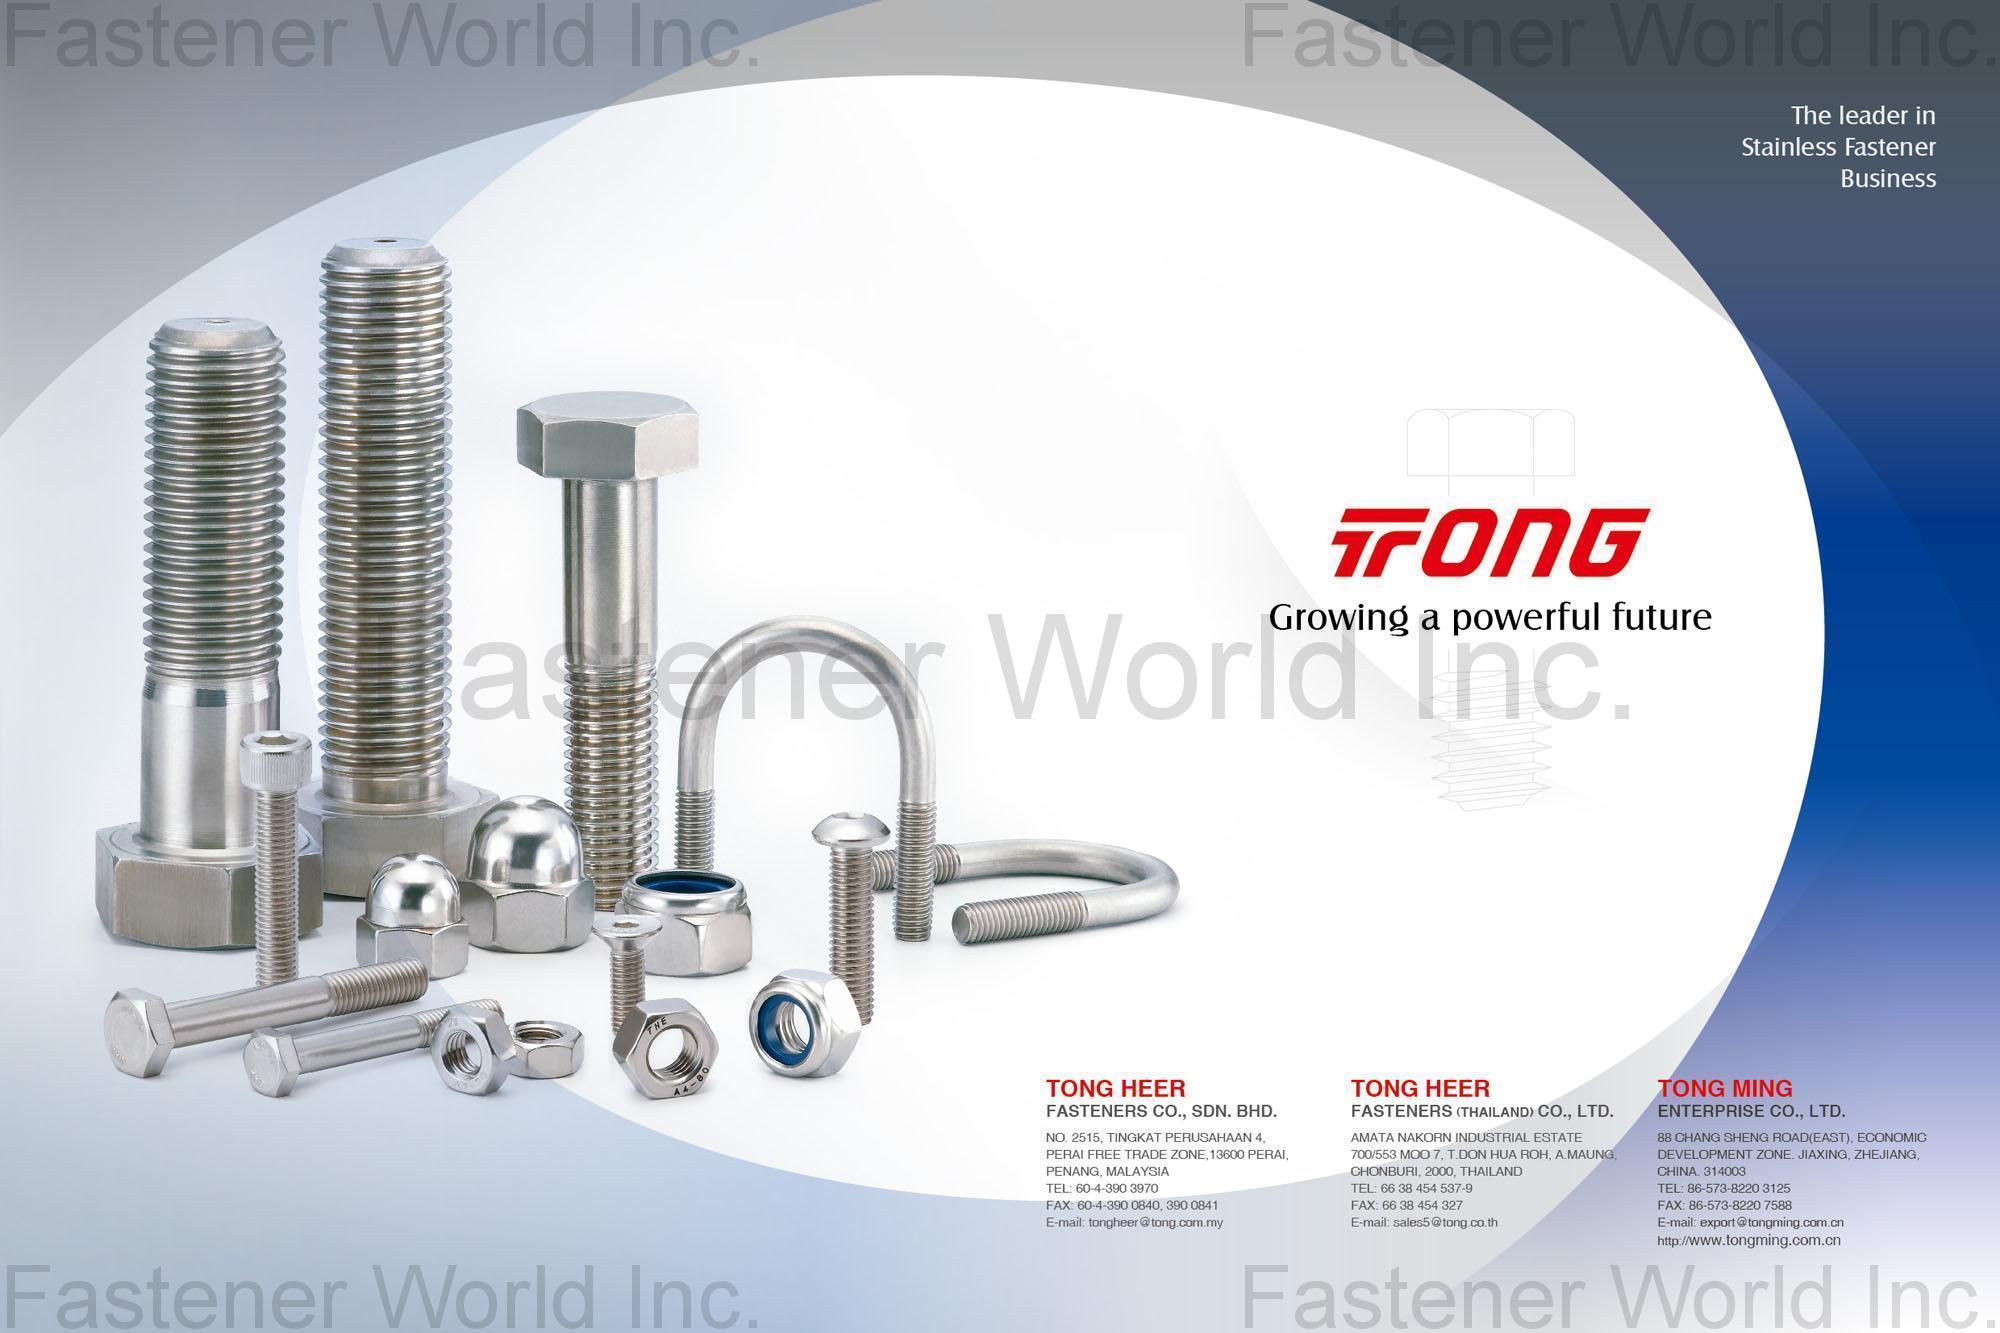 TONG HEER FASTENERS CO., SDN. BHD  , Stainless Steel Fasteners